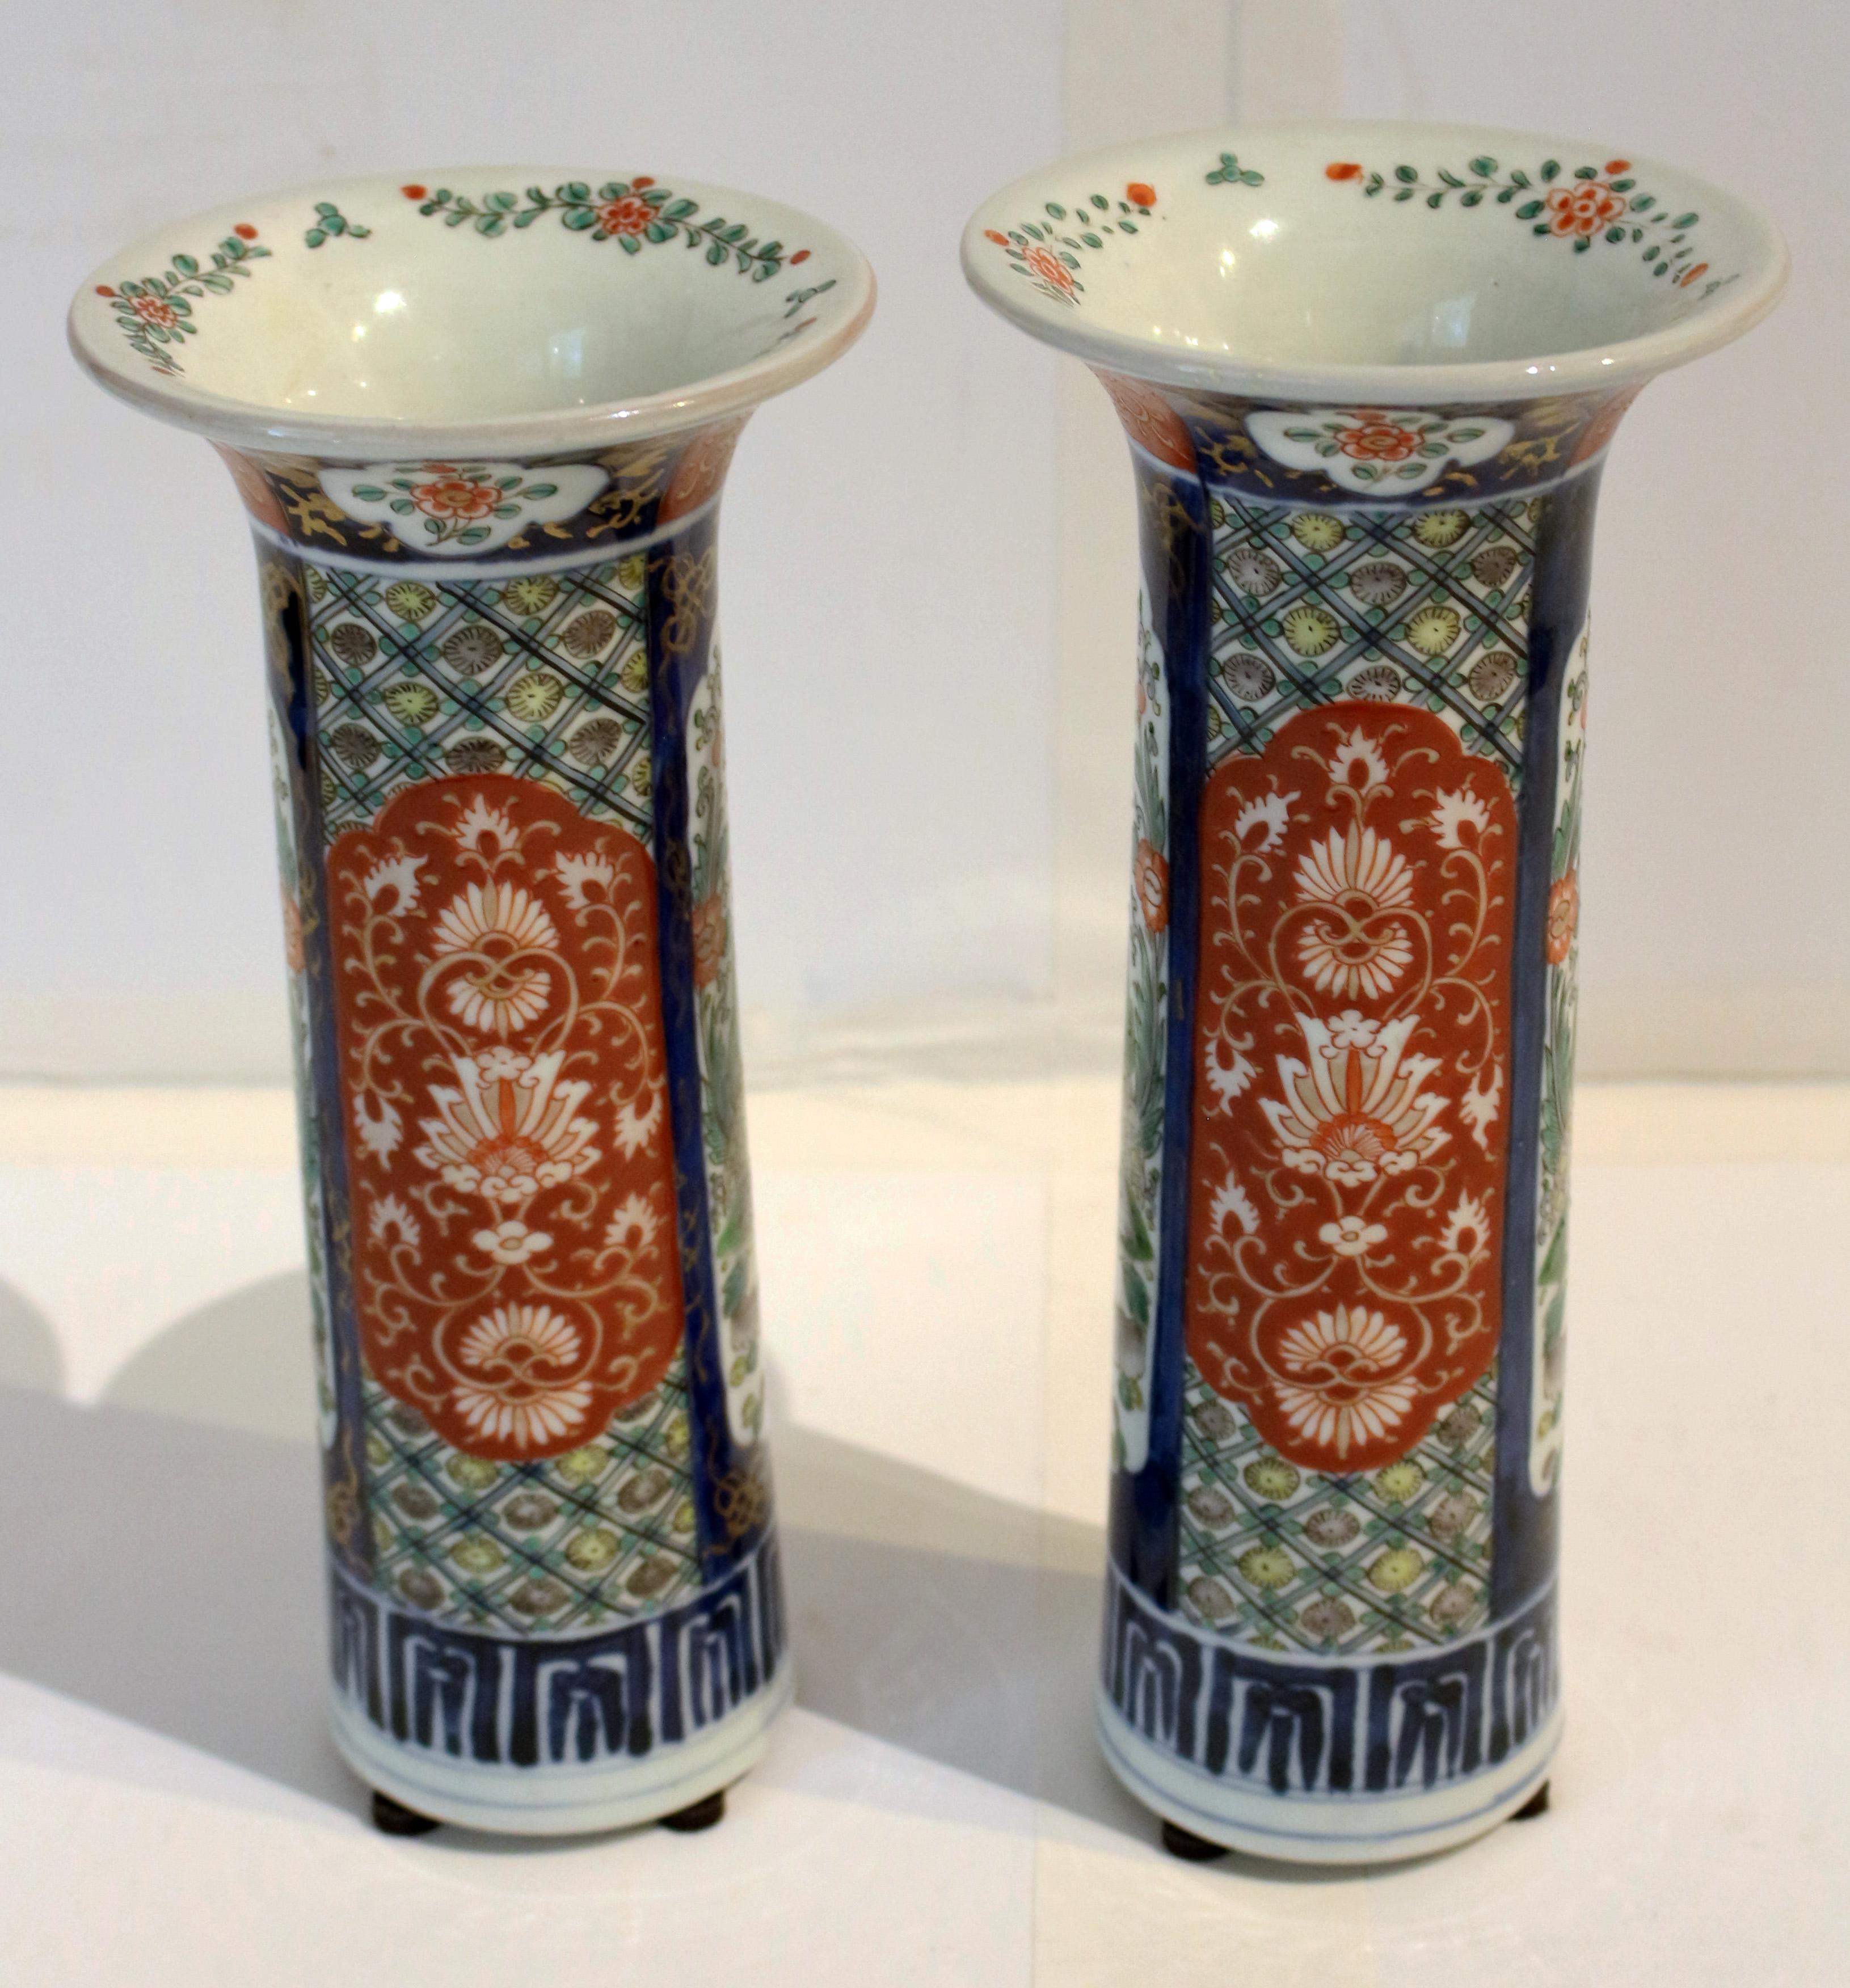 Circa 1860 pair of Imari vases, Japan. Beaker form; well decorated with trellises behind stylized burnt orange floral cartouches alternating with cartouches with a foo dog in a garden. One slightly shorter than the other. 4 1/4